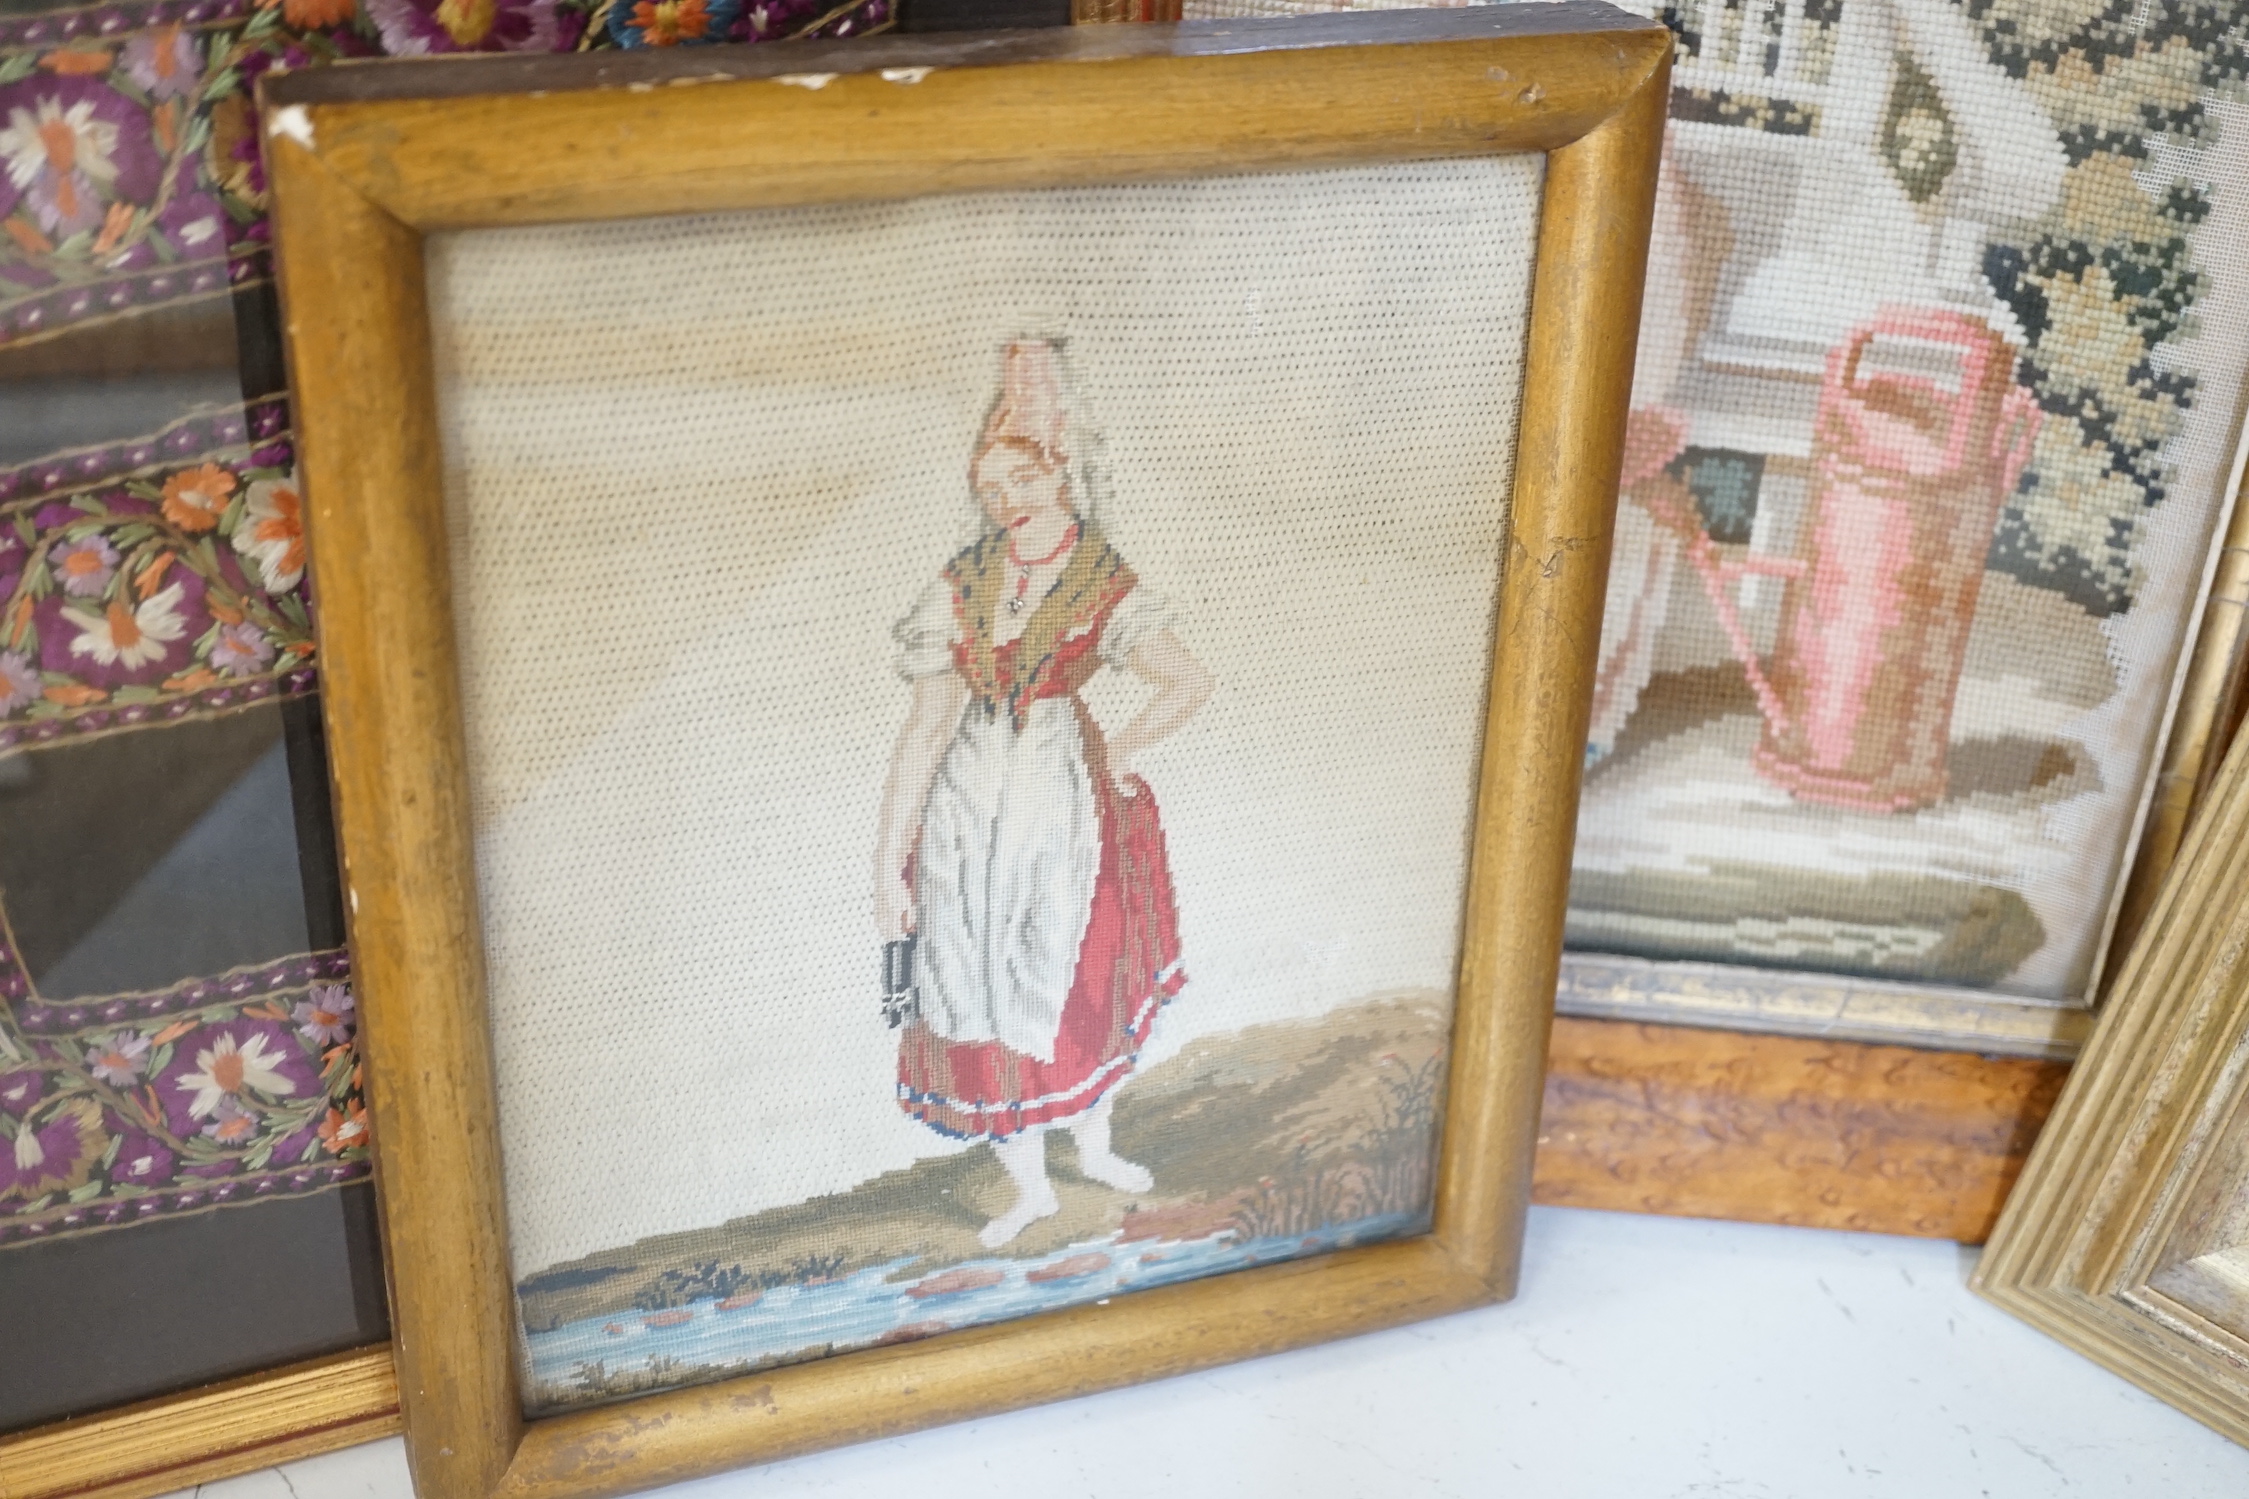 A framed Regency embroidery, two later figurative embroideries and a pair of embroidered slipper fronts, Regency embroidery 37cm wide, 41cm high